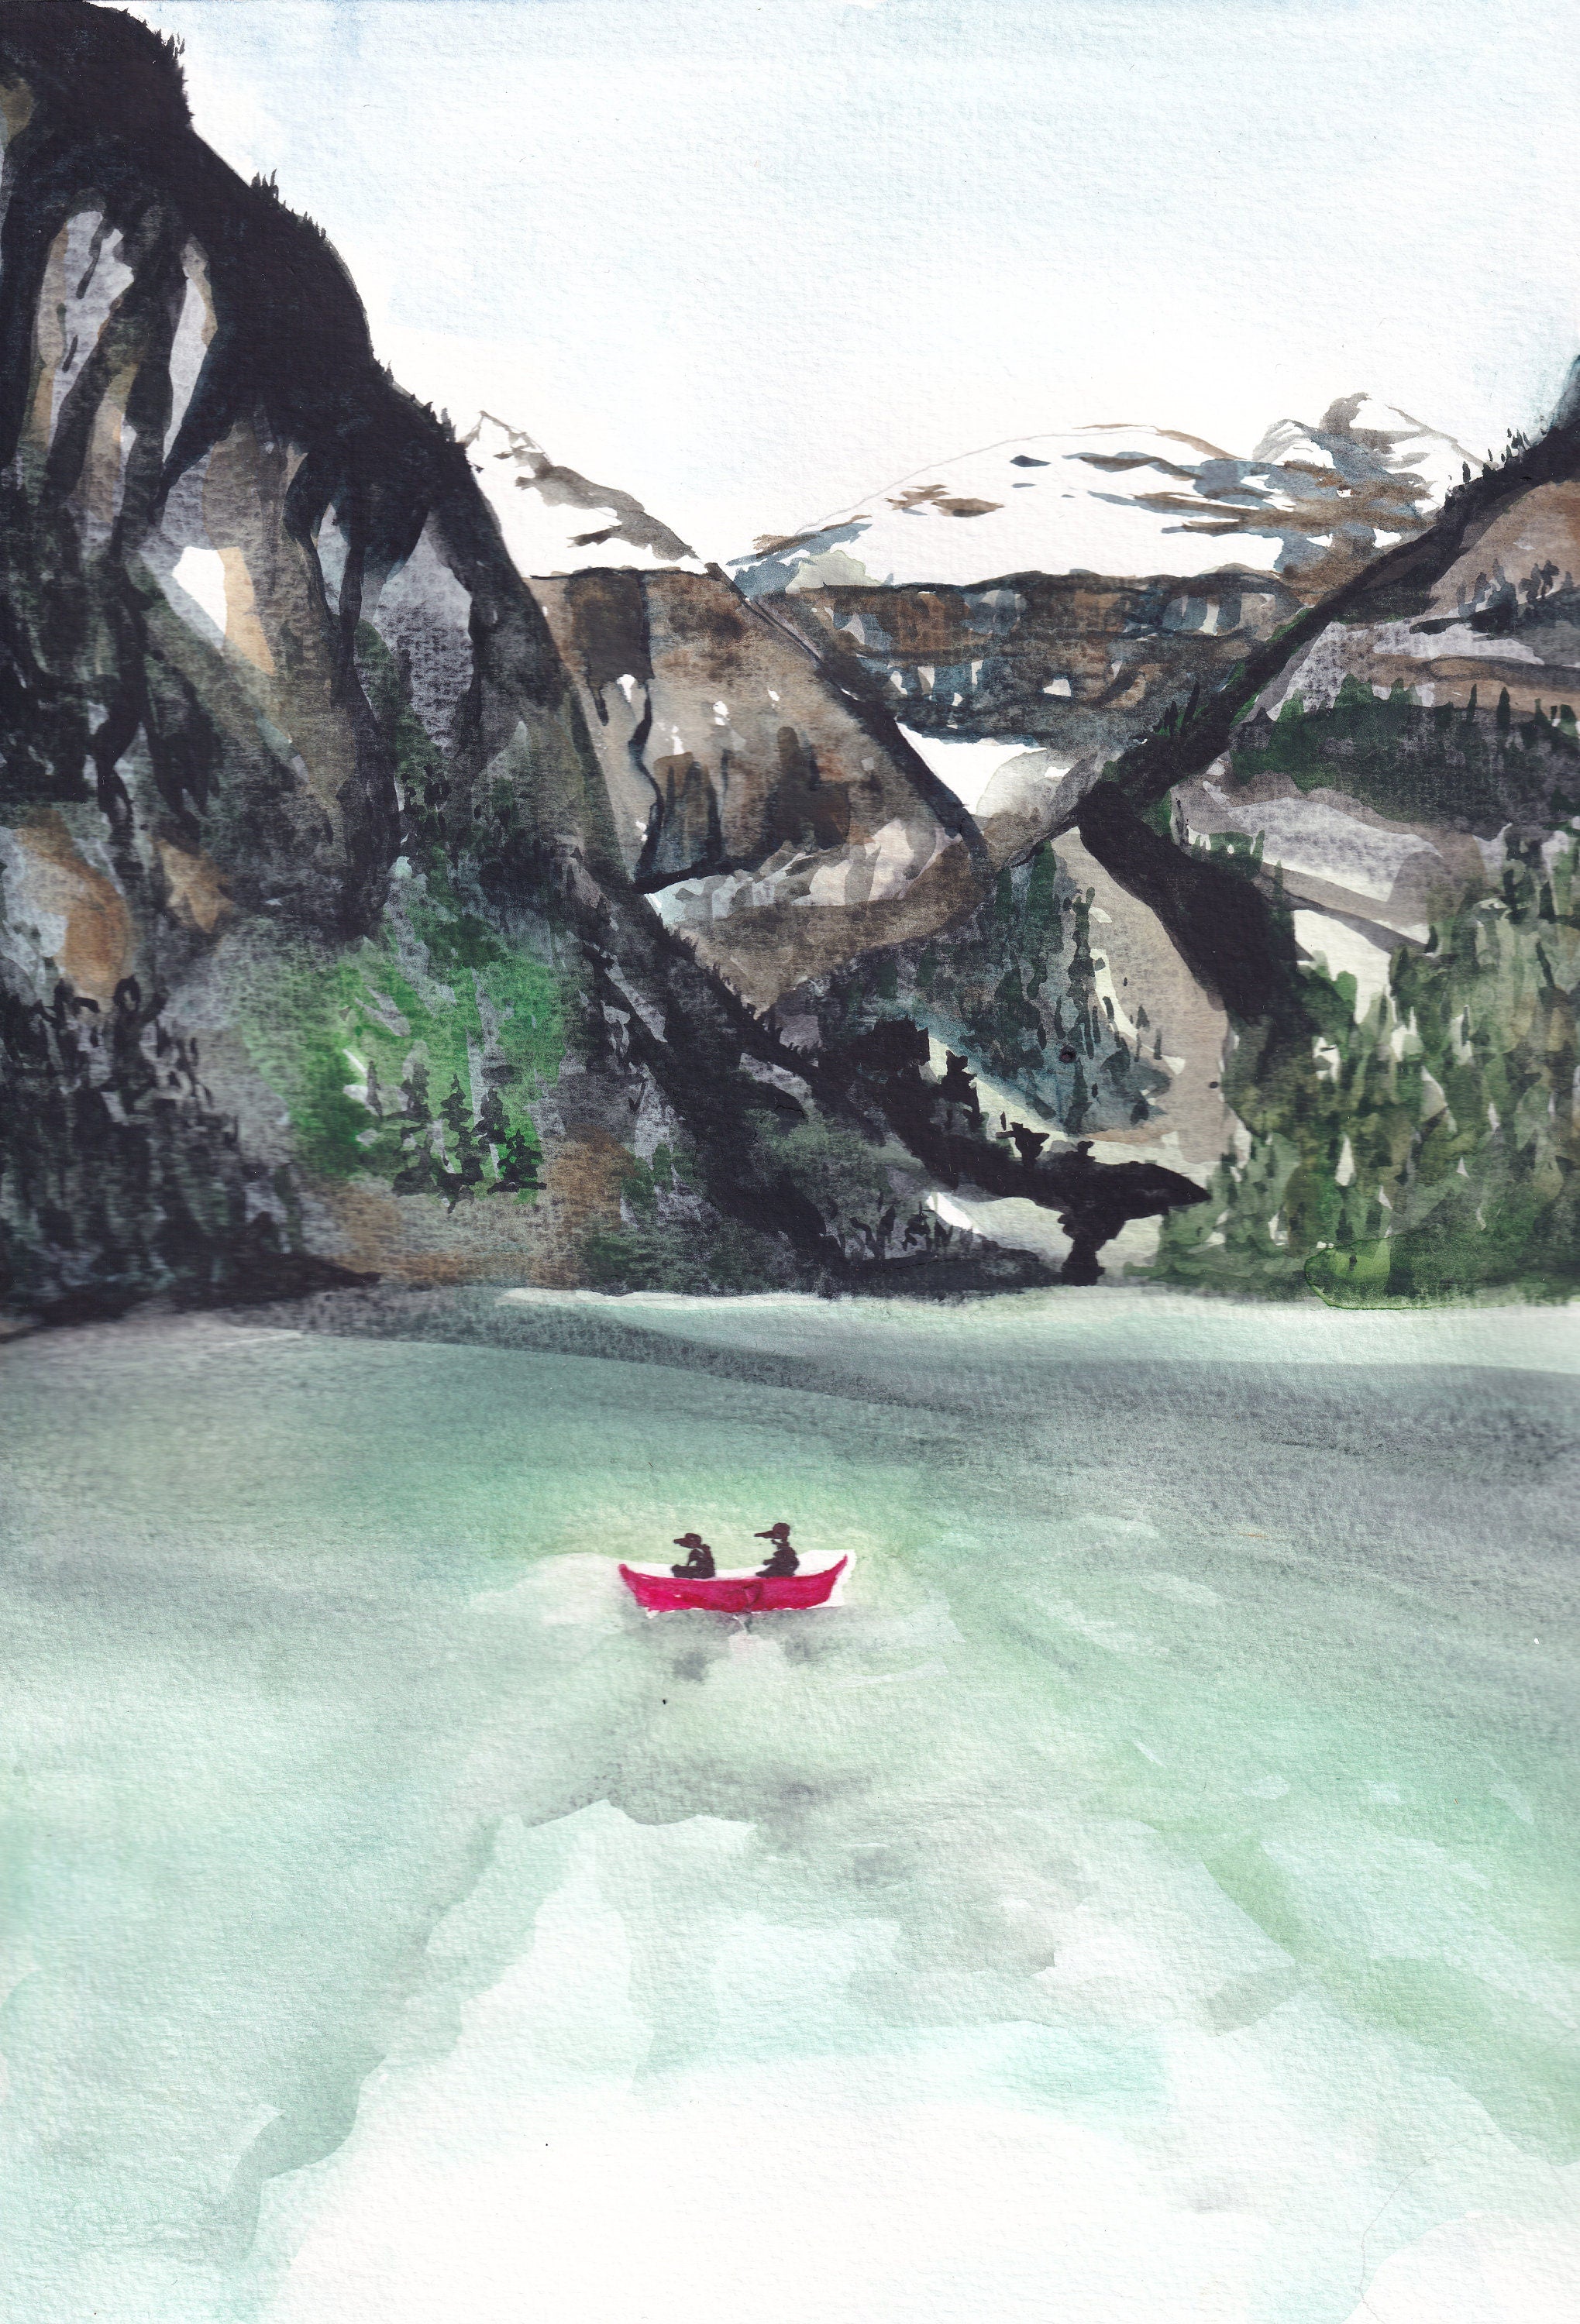 Lake Louise/Banff National Park and Mountains print of painting by Medjool Studio. Print of original gouache painting of the Lake Louise Mountains, including the lake, mountains and a small red boat.